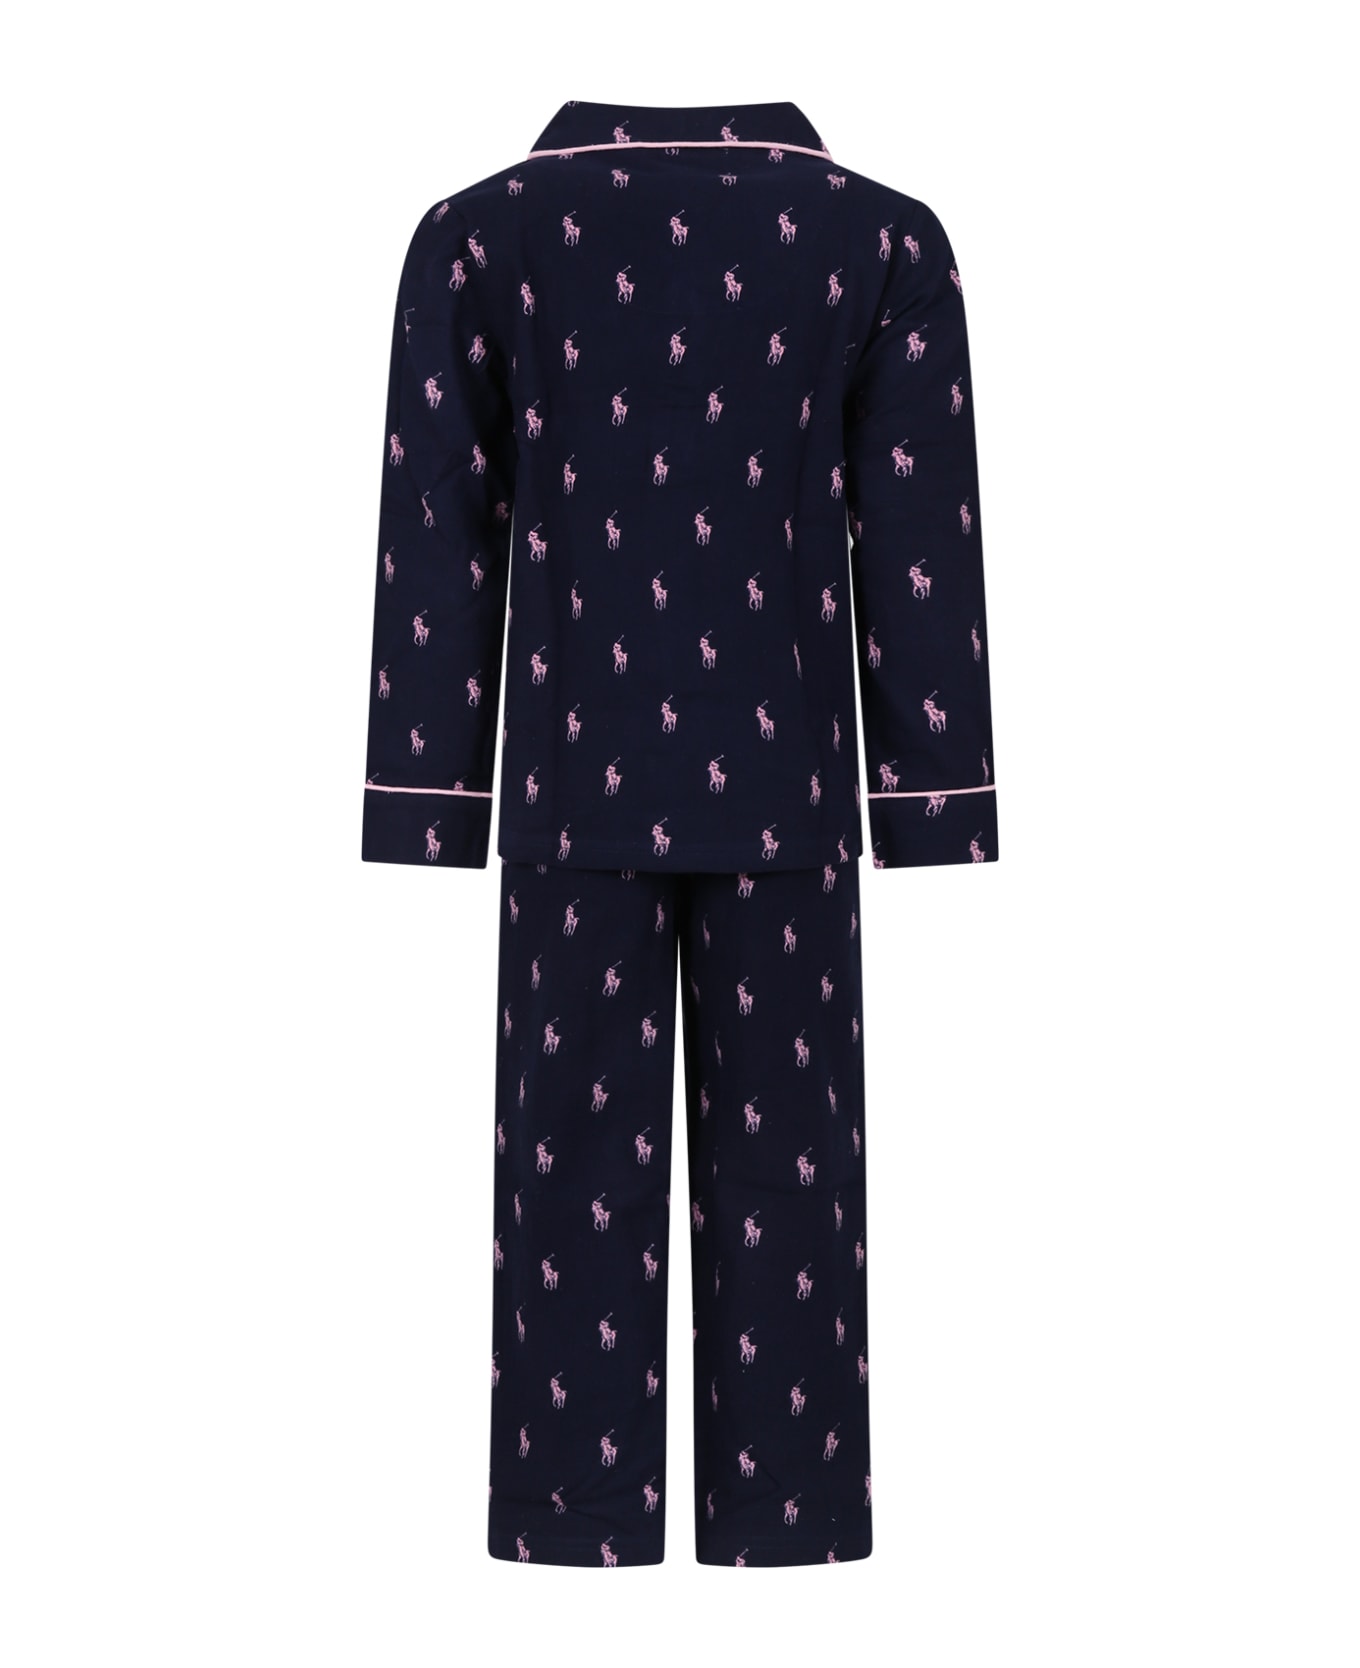 Ralph Lauren Blue Pajamas For Girl With Iconic Pony - Blue